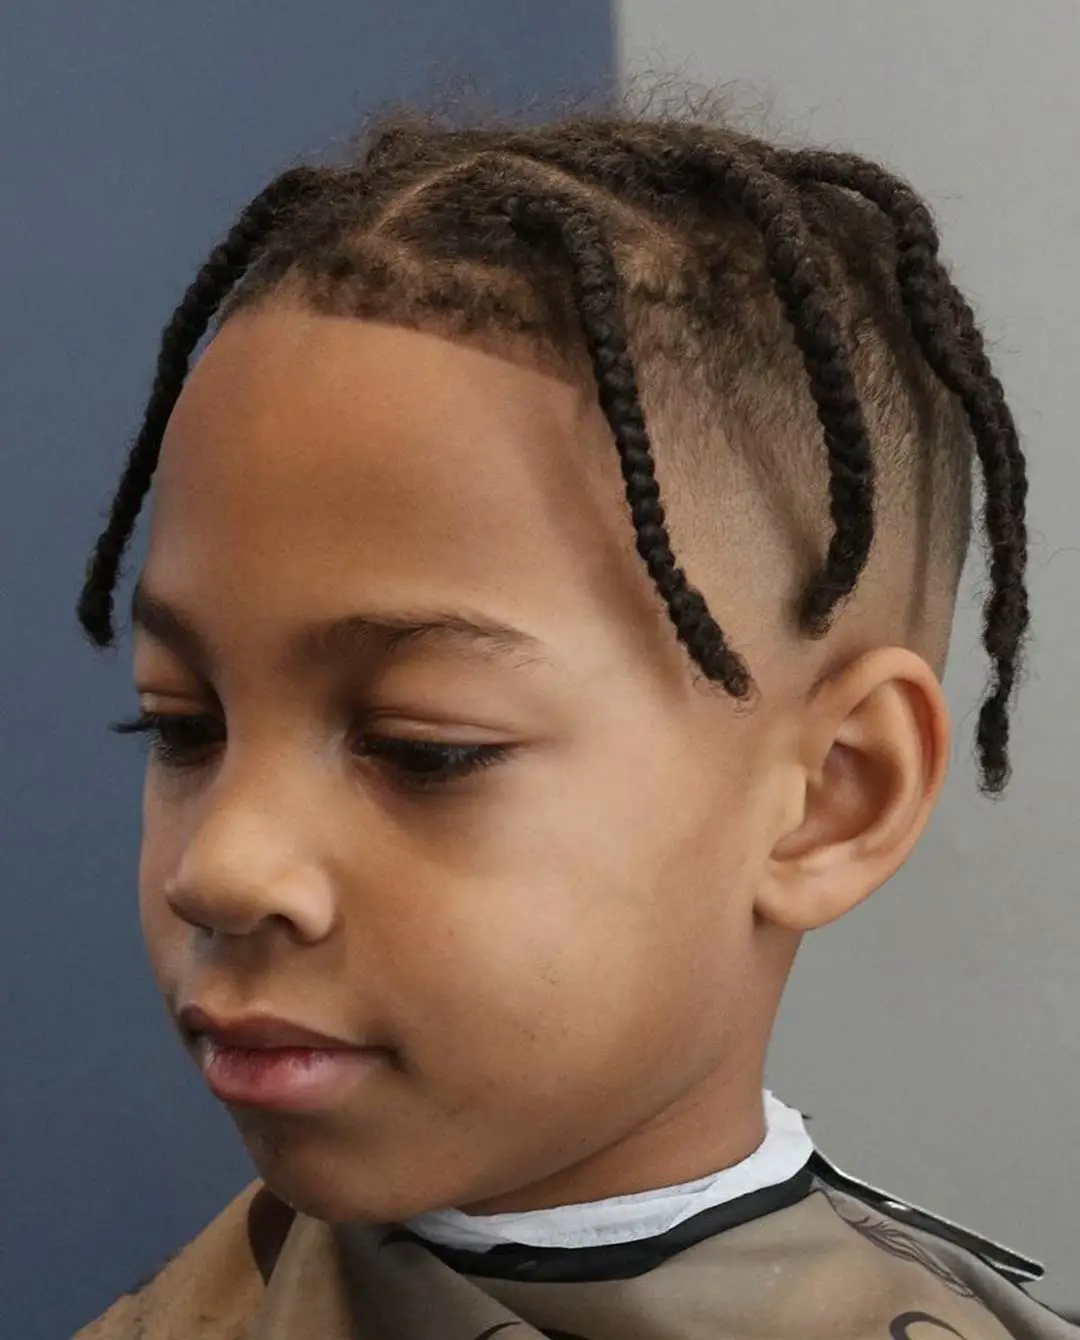 34+ Best Black Boys Haircuts & Hairstyles in 2023 - Men's Hairstyle Tips